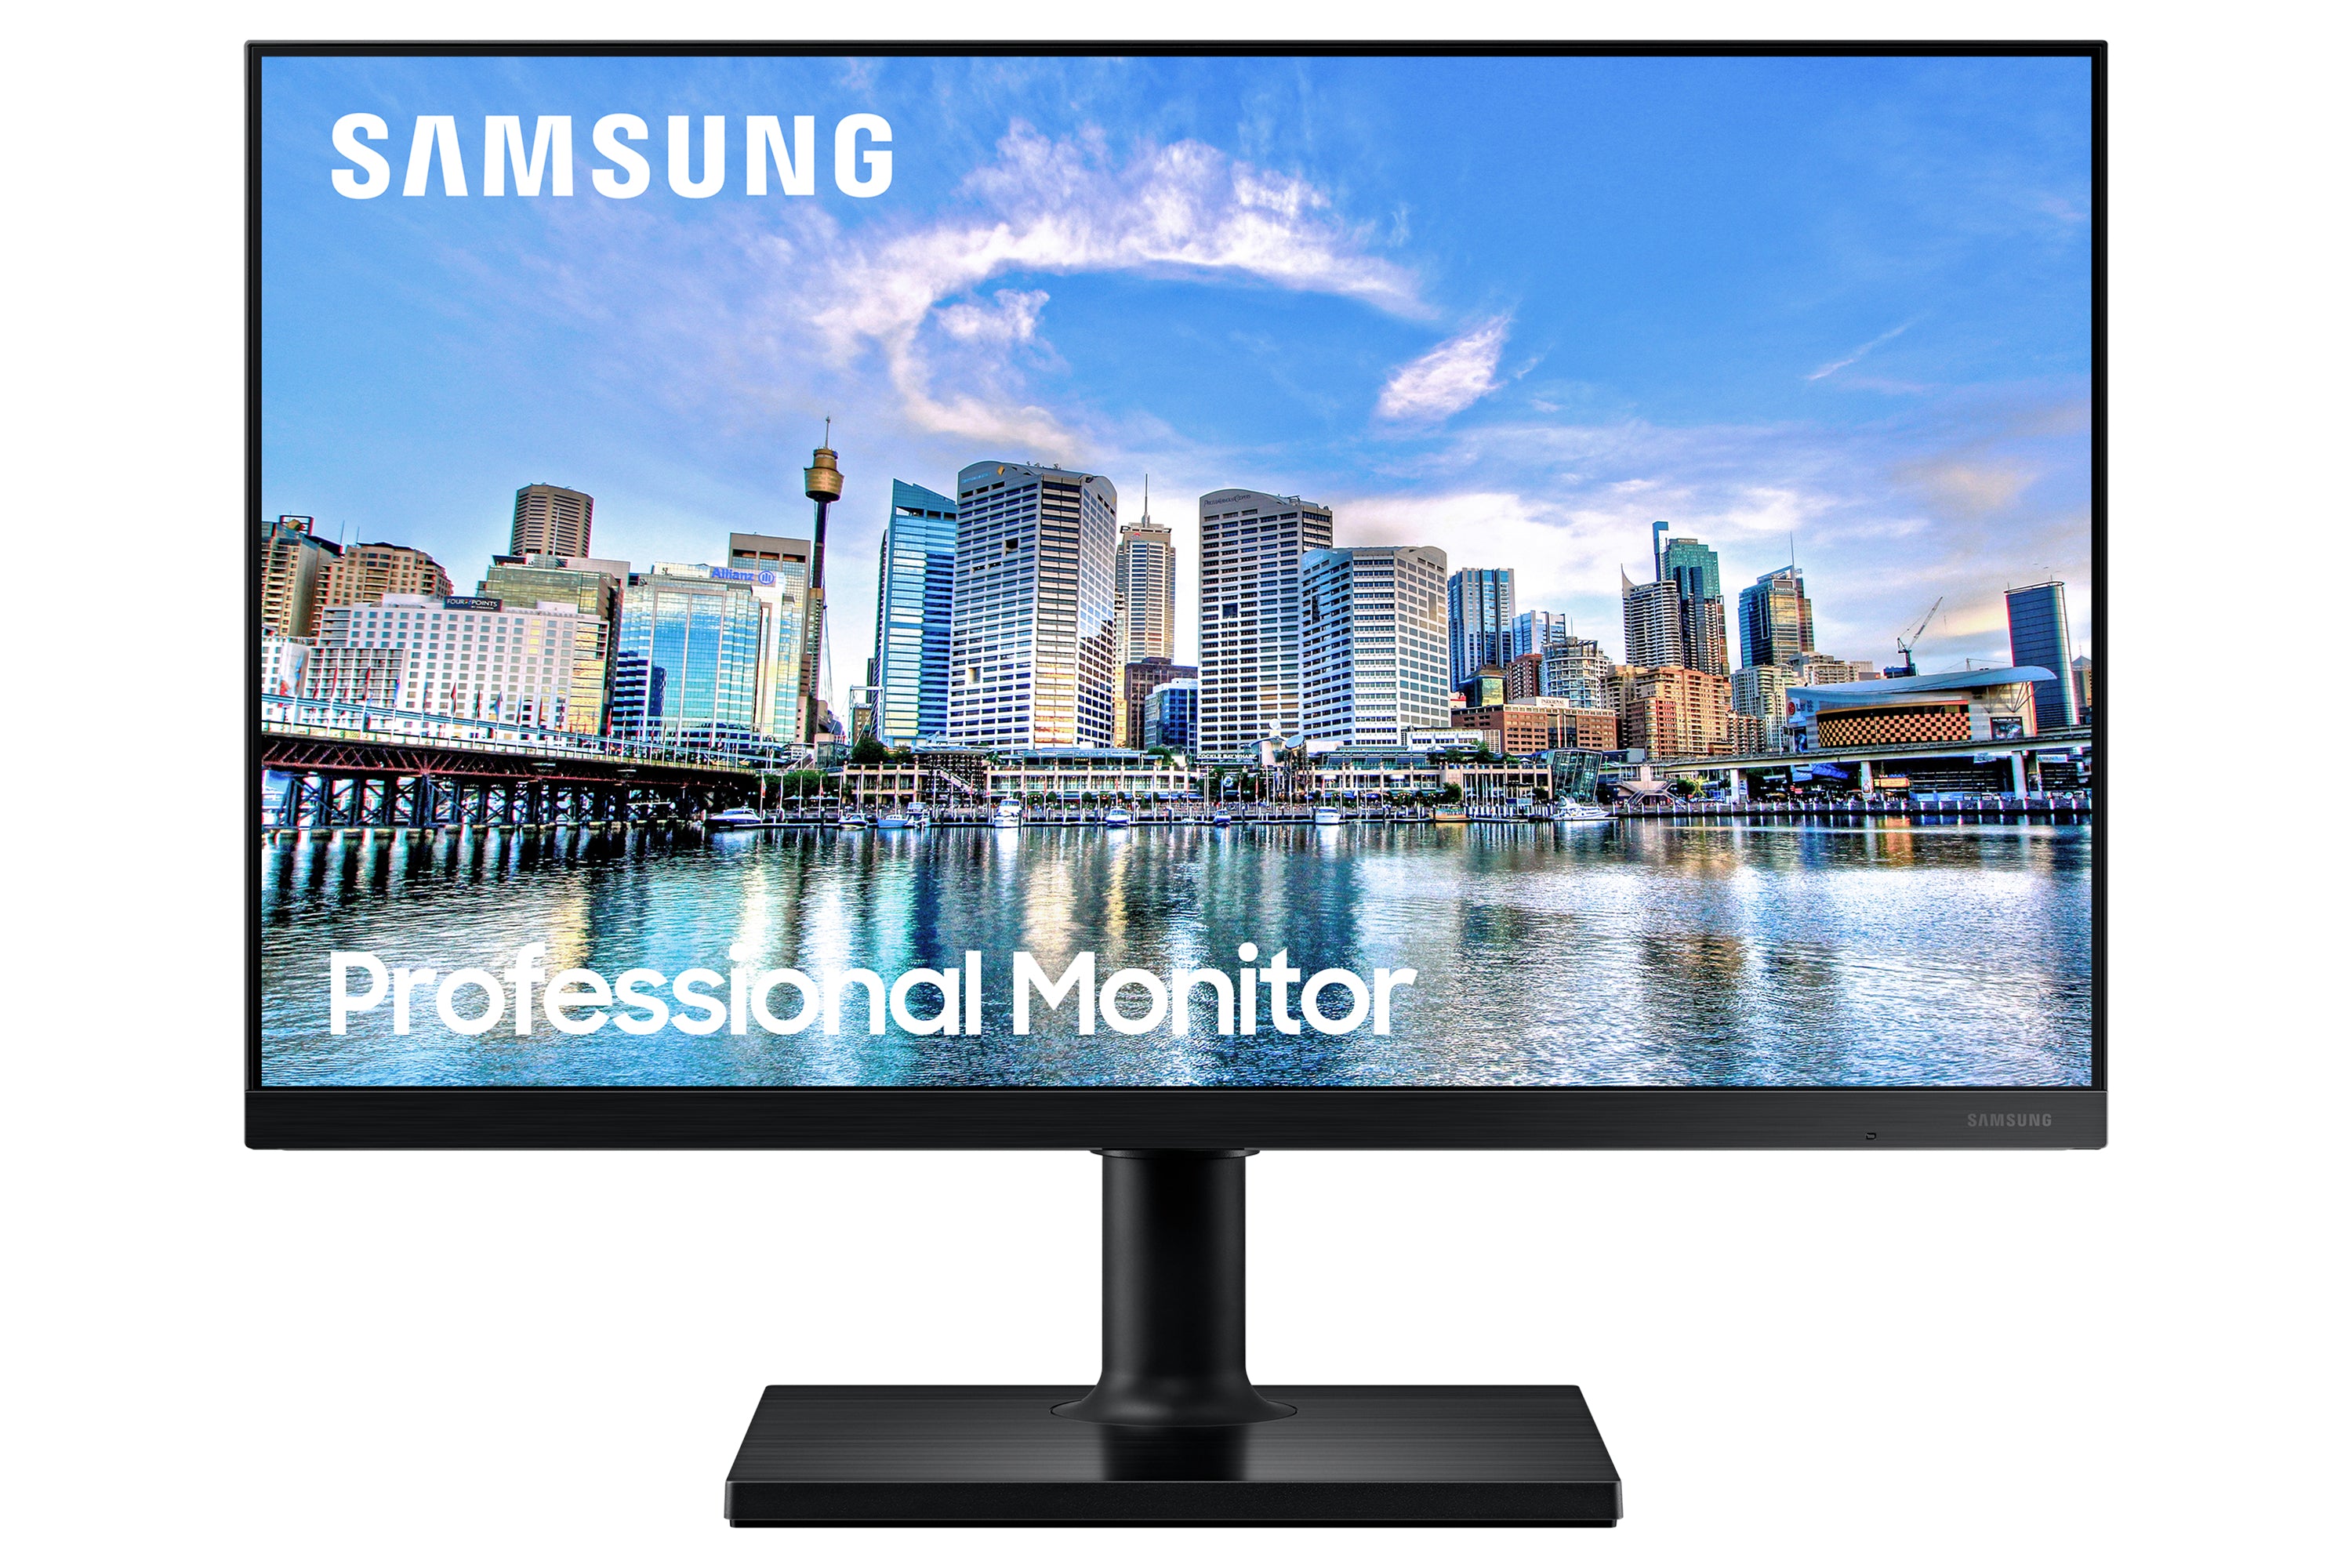 SAMSUNG F24T450F 23,8" 16:9, 1920X1080 IPS,5MS, HAS,  HDMI*2/DP,  HDMI CABLE.